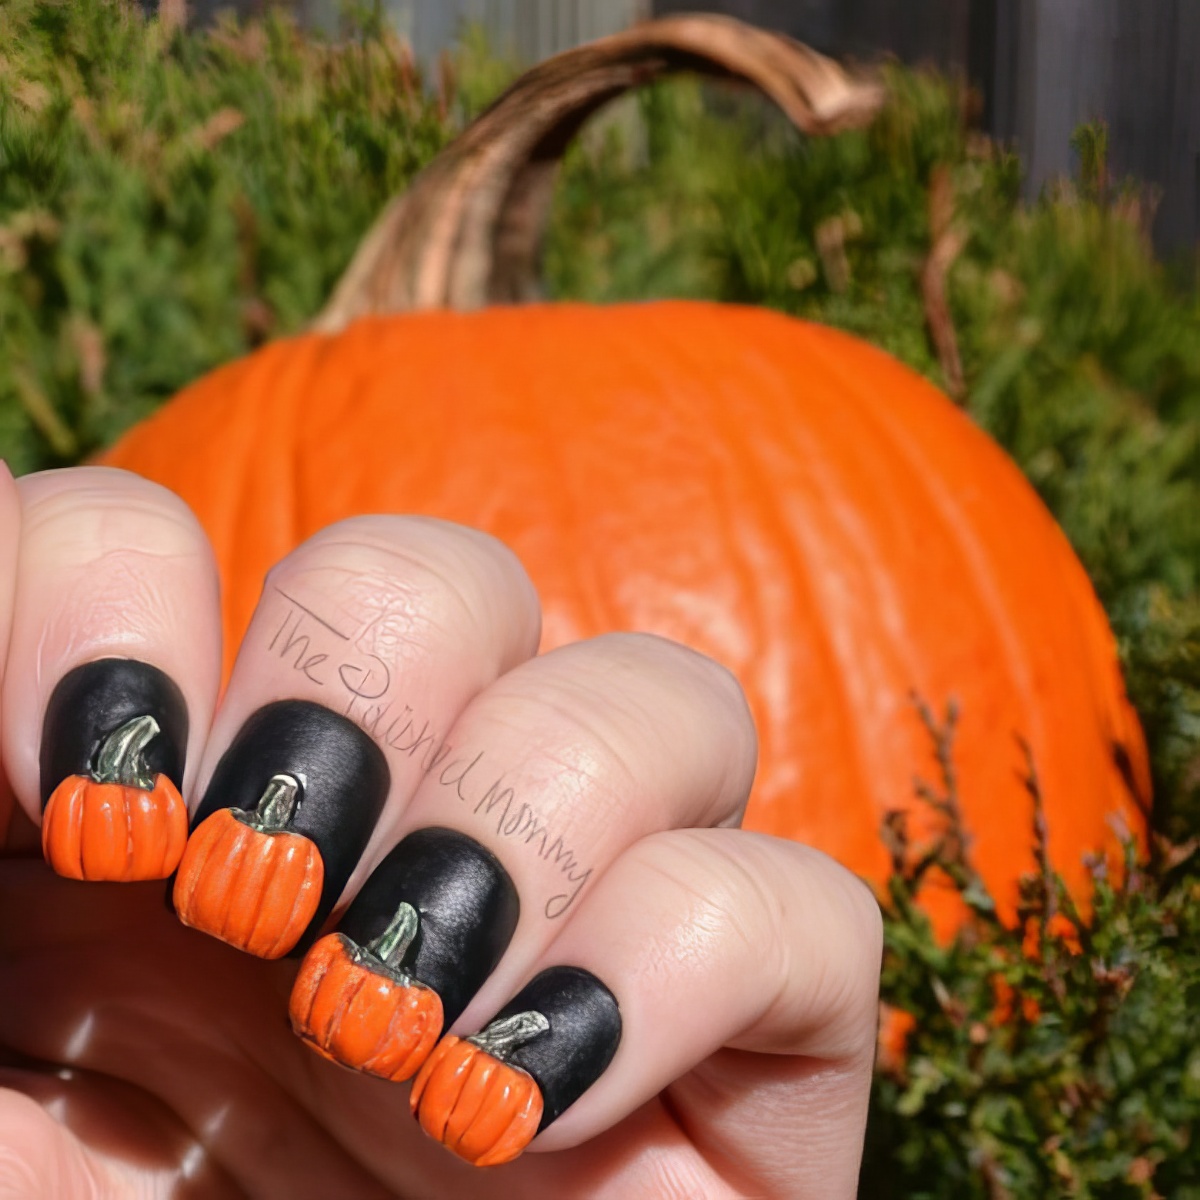 Night a the Pumpkin Patch with these Pumpkin nails design!